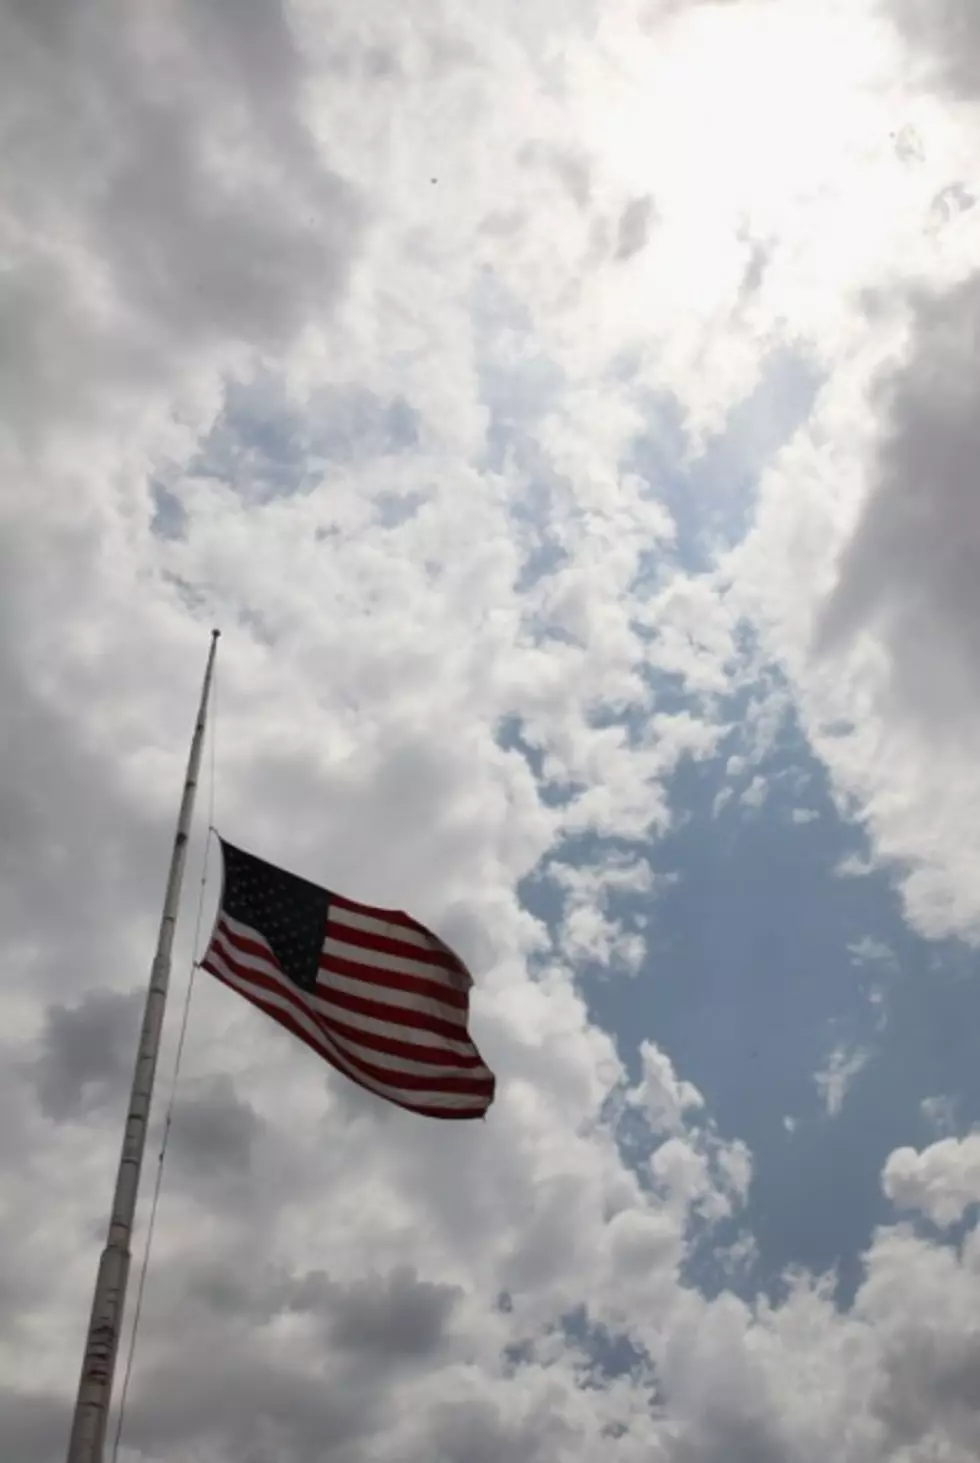 Why Are Flags At Half Mast Today?